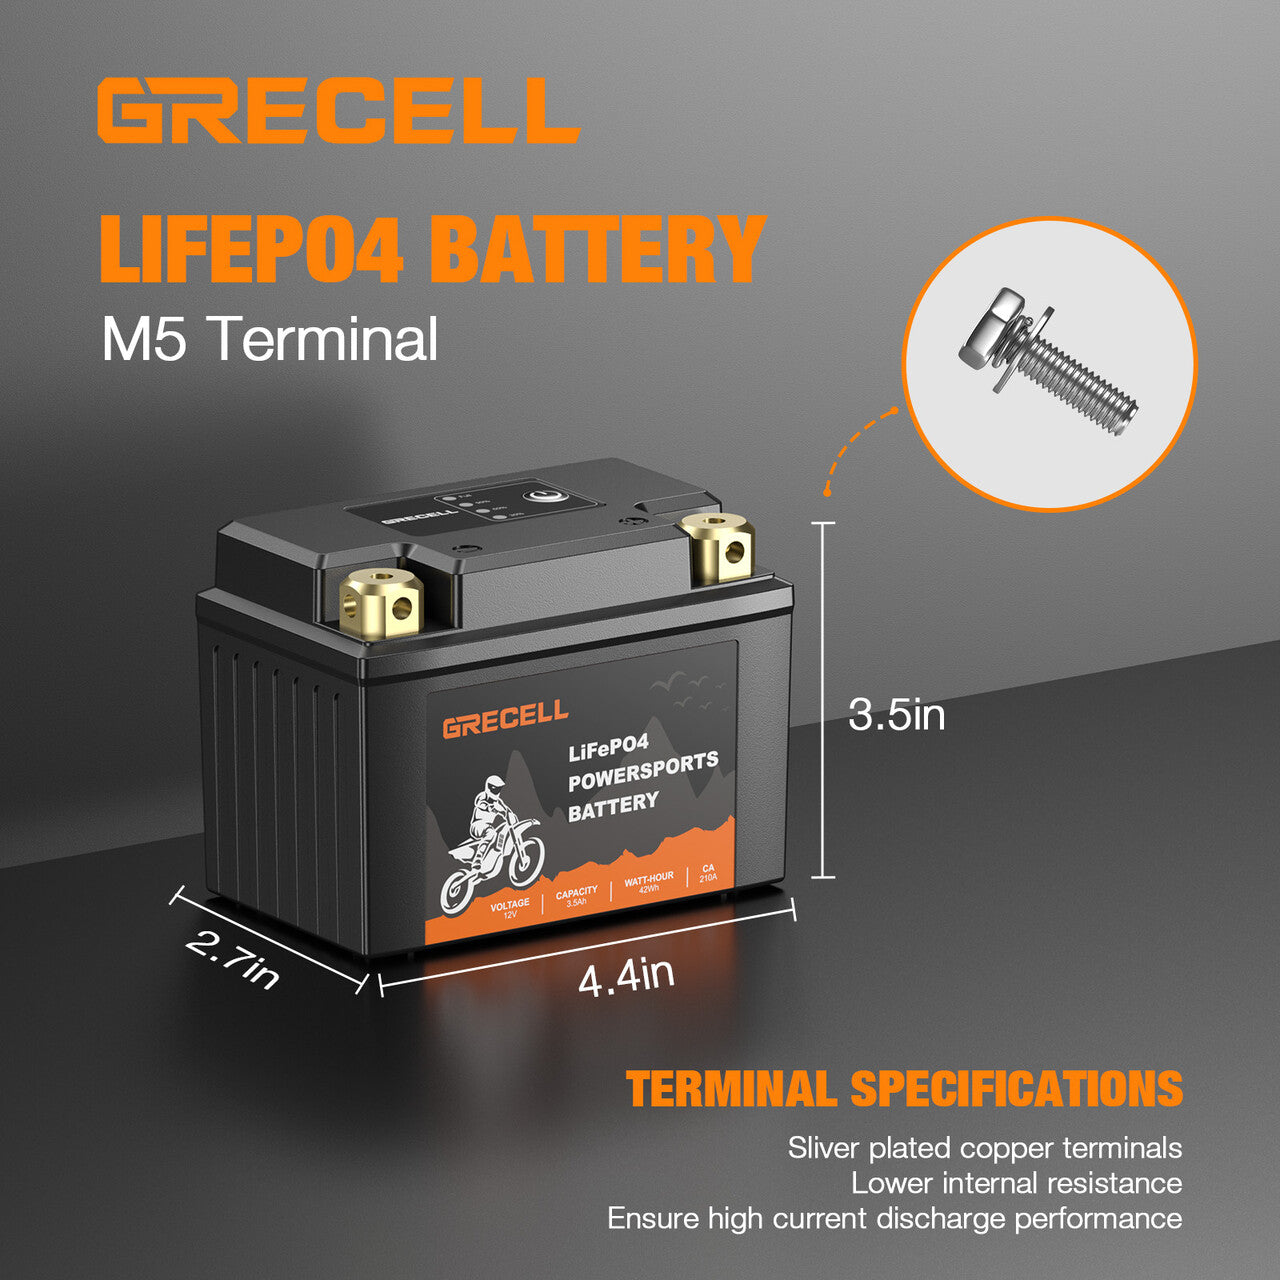 GRECELL Lithium 12V 3.5Ah Motorcycle LiFePO4 Battery